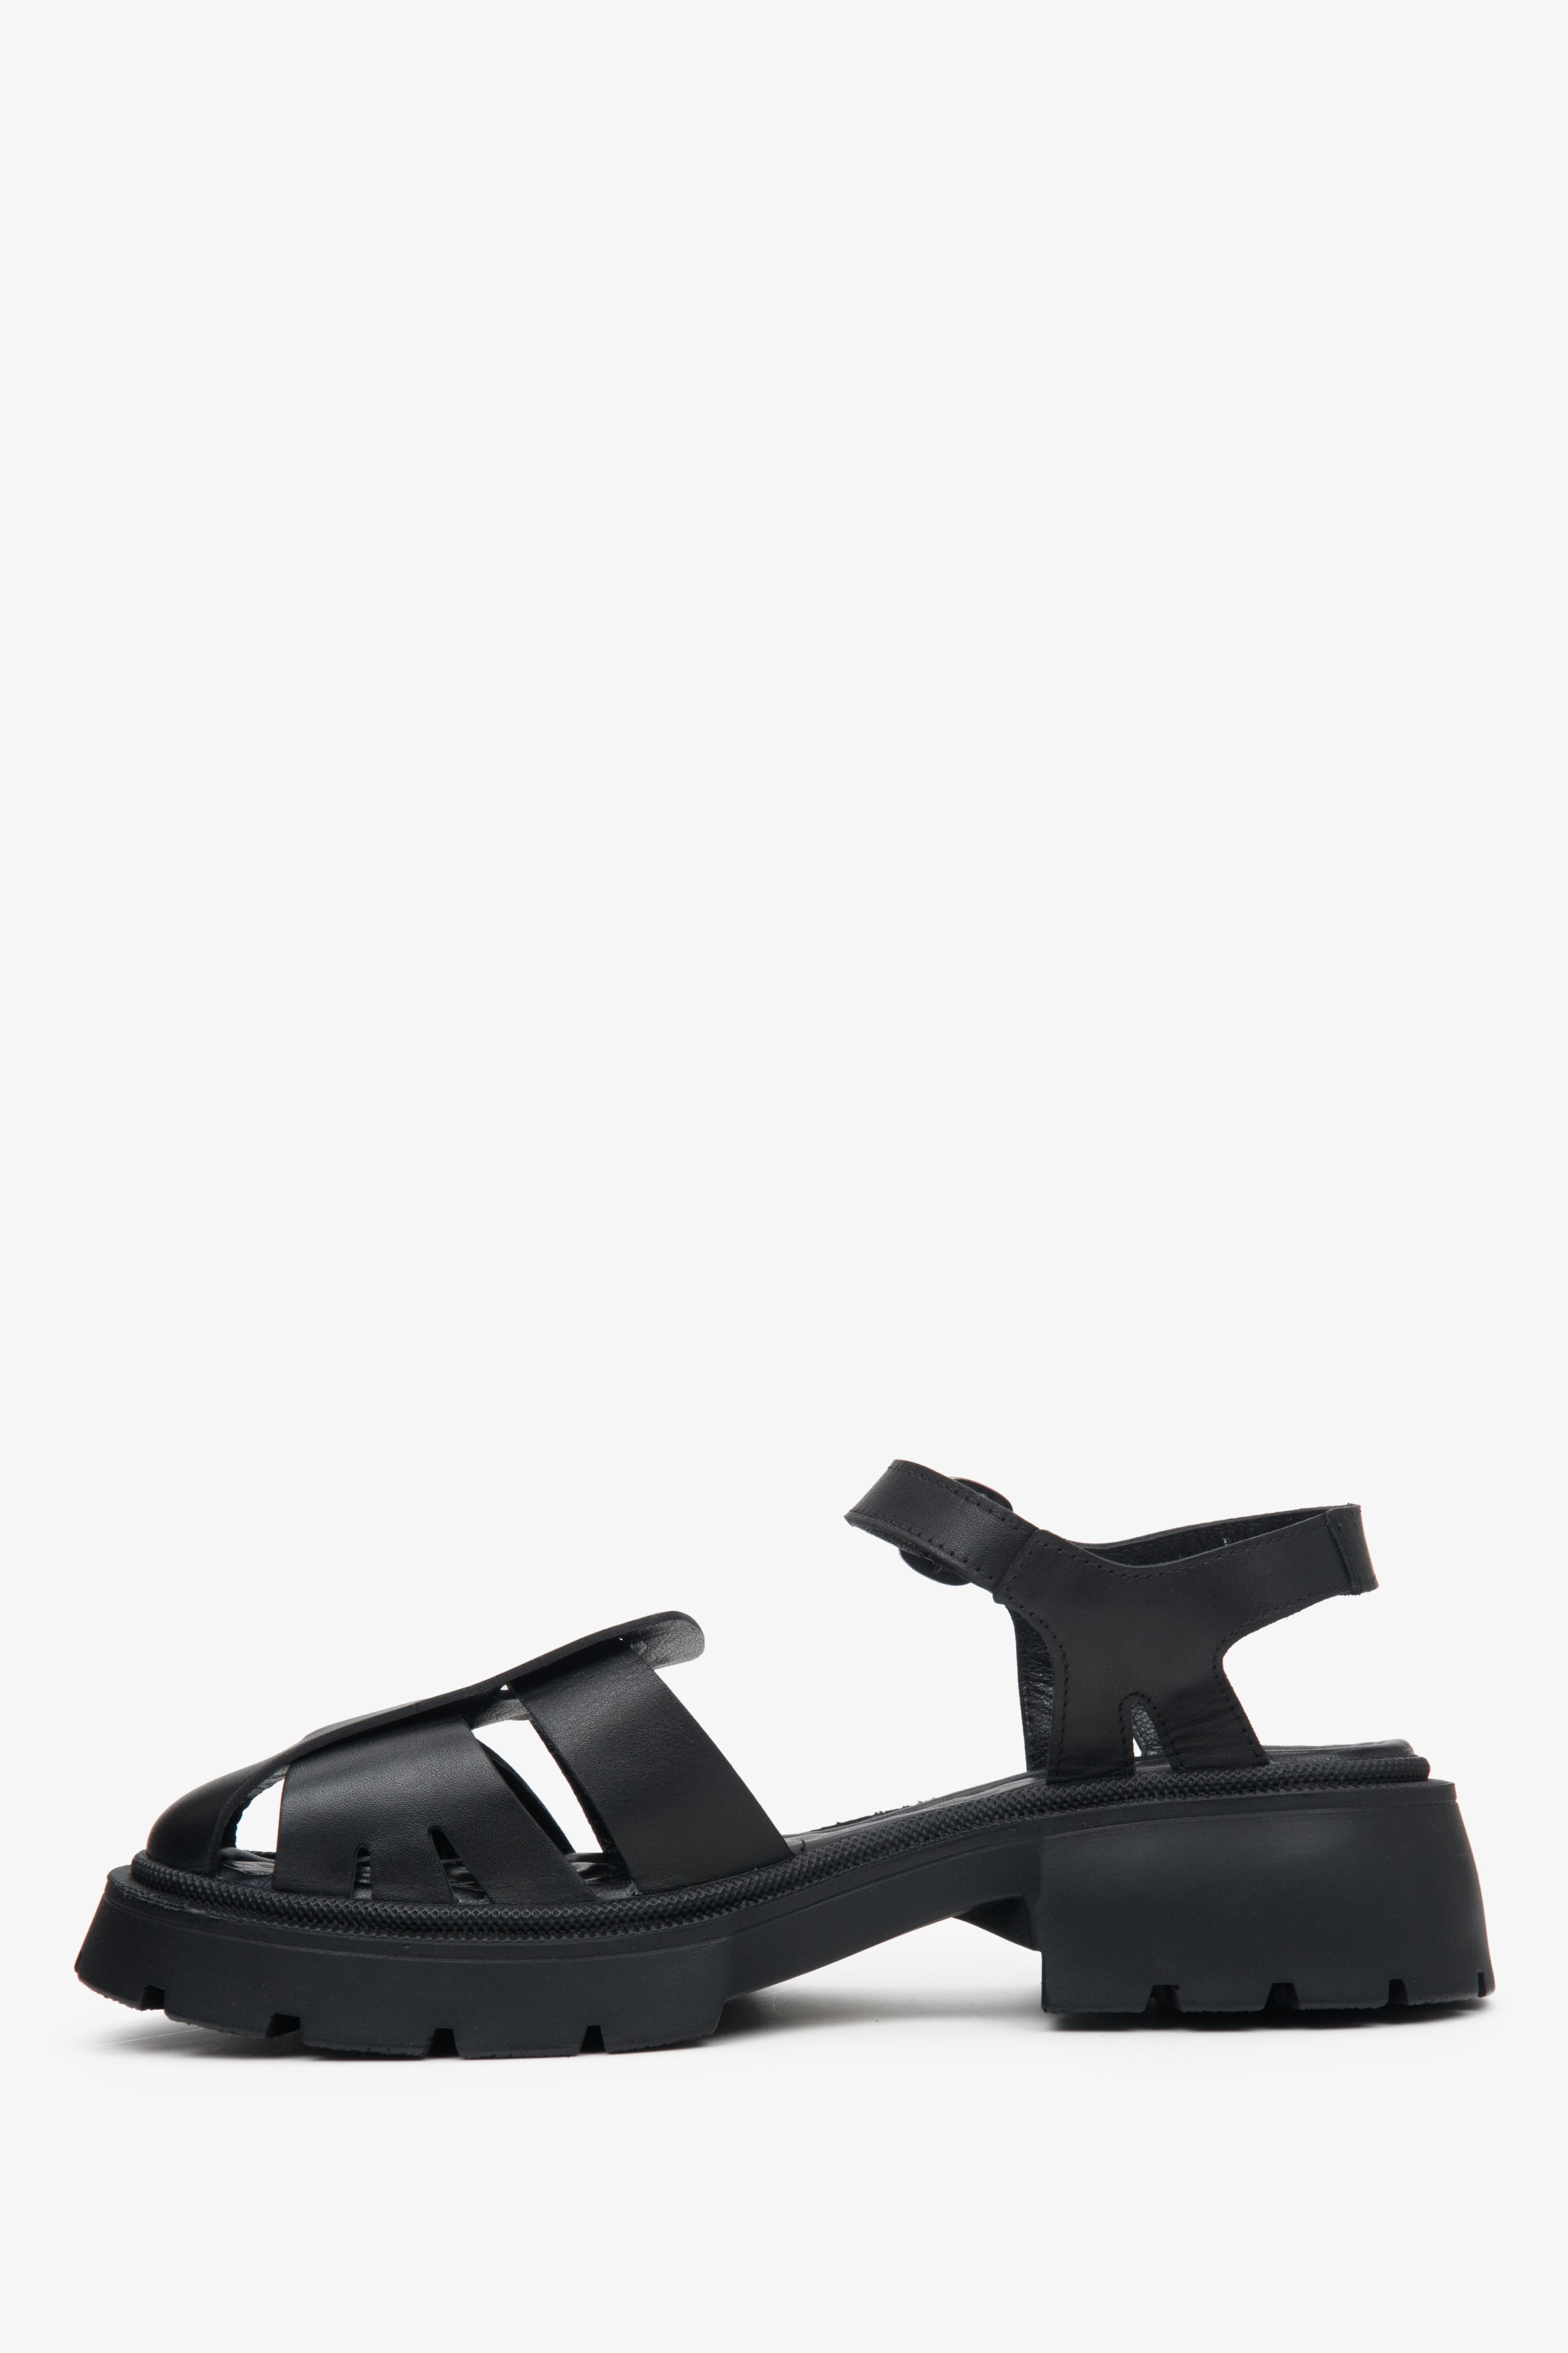 Closed-toe Italian leather women's sandals on a chunky platform by Estro in black.